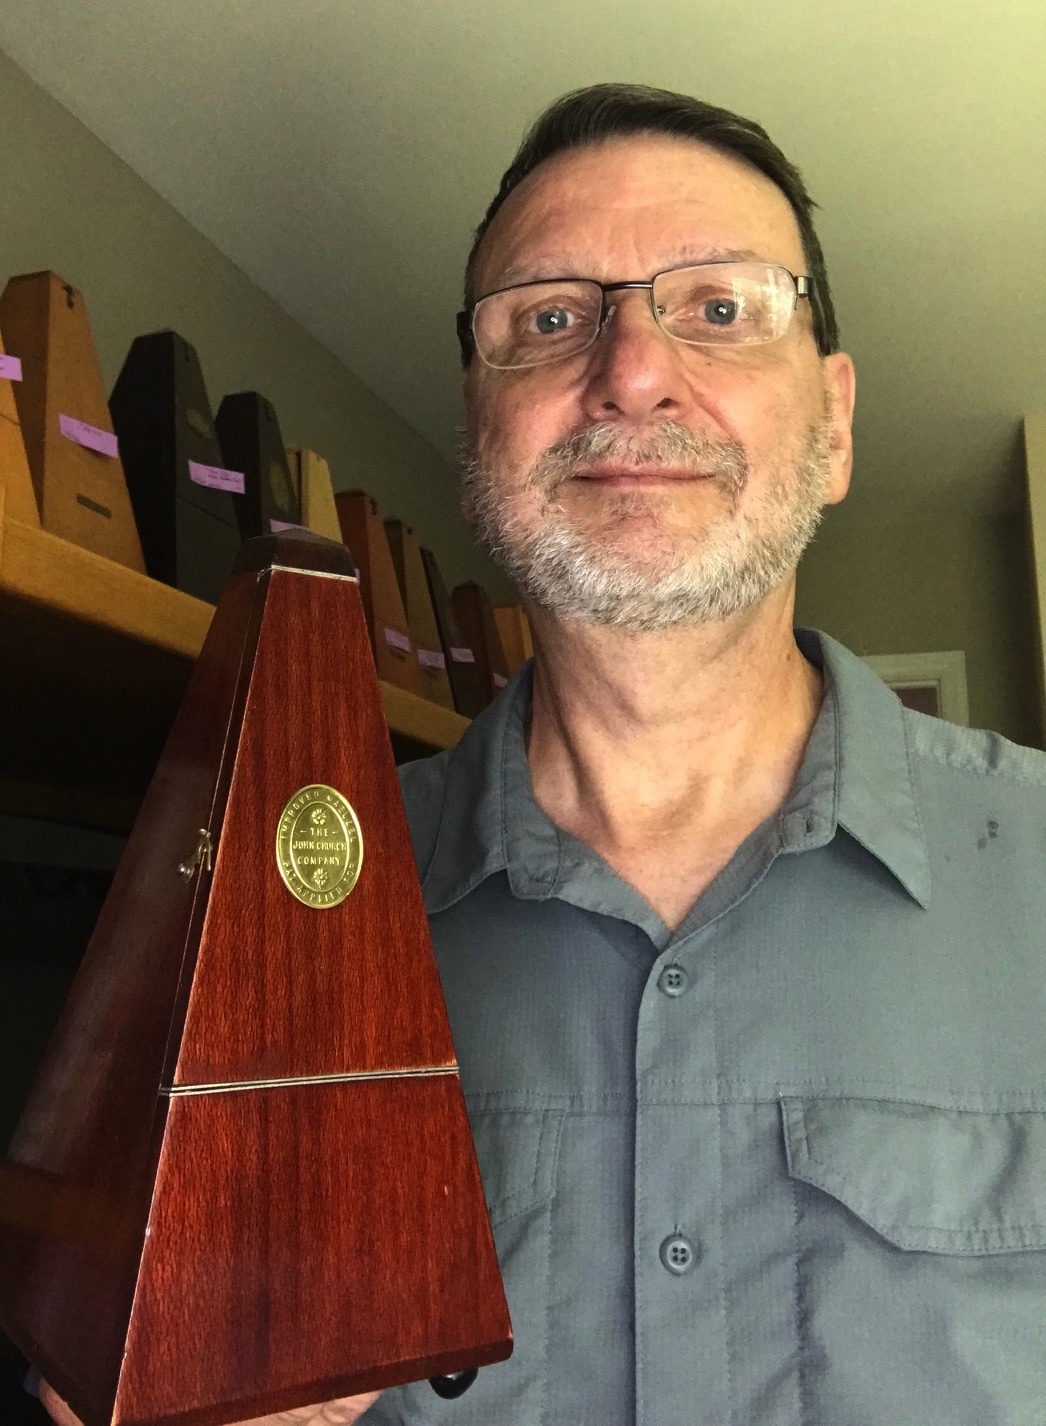 History of the Metronome